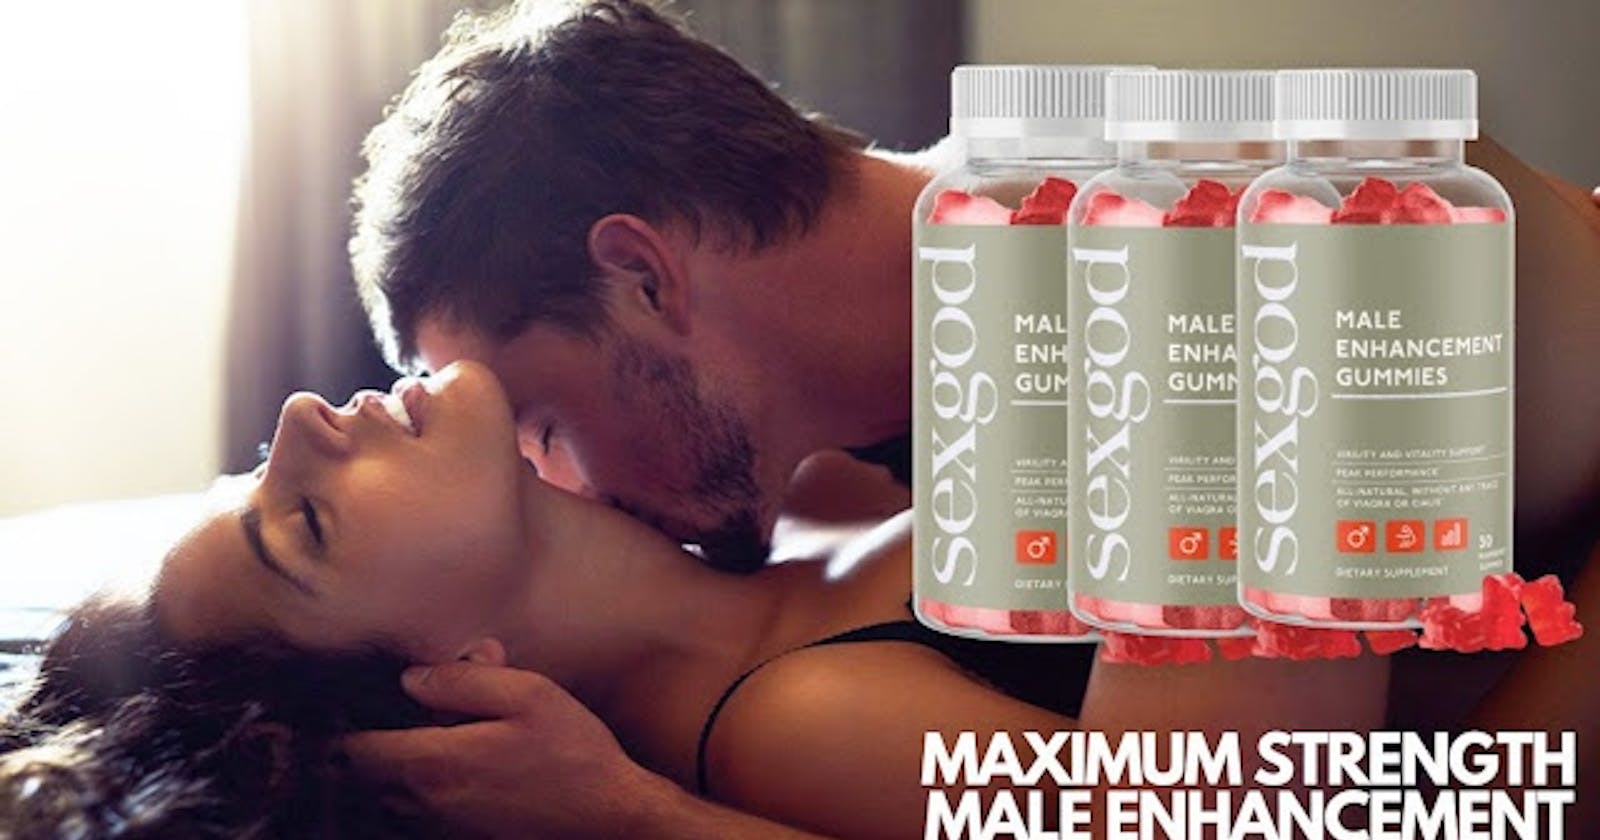 Sexgod Male Enhancement Gummies improved sexual performance ,Improved blood circulation, better skin, improved immunity Reviews, Price, Ingredients,